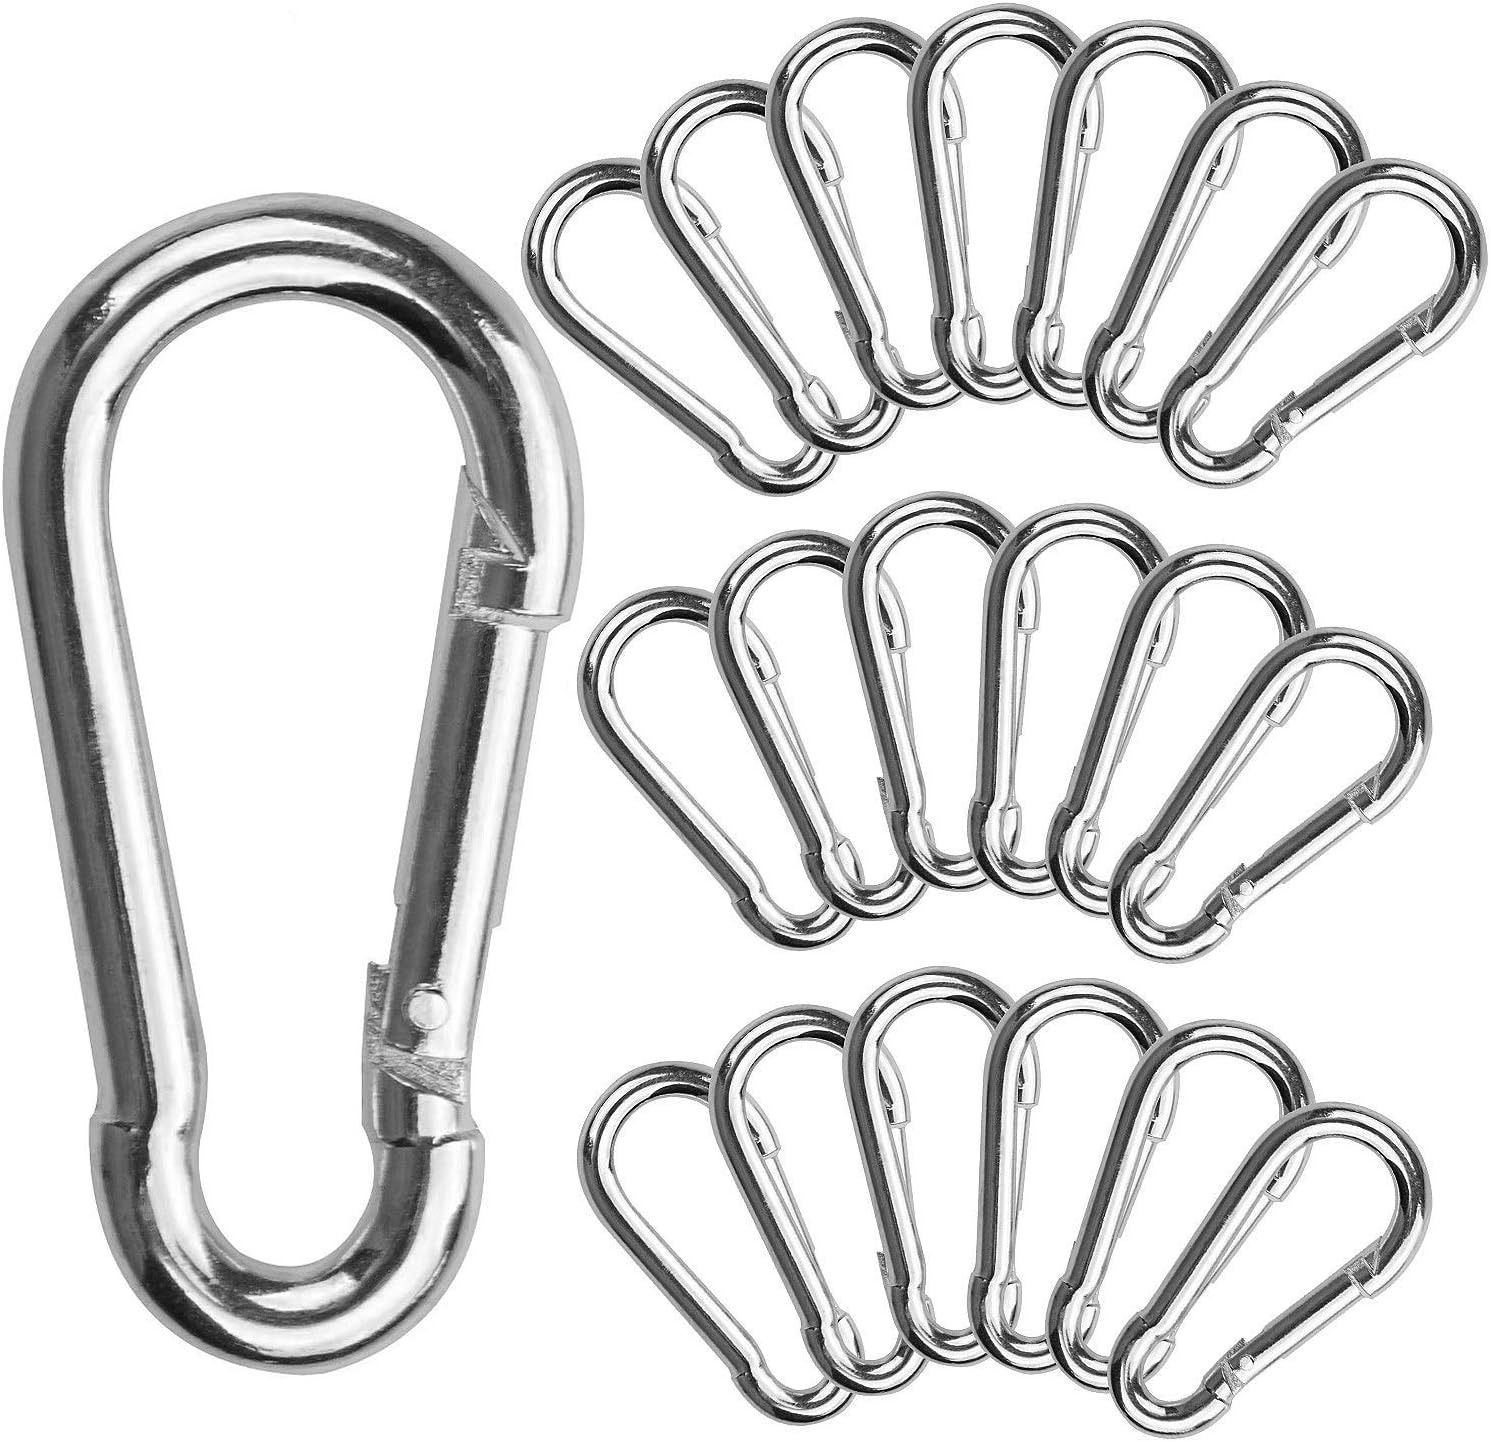 Acrux7 20 Pcs Small Carabiner Clip 1.57 Inch Stainless Steel Spring Snaps  Hook M4 for Keys Swing Set Camping Fishing Hiking Traveling